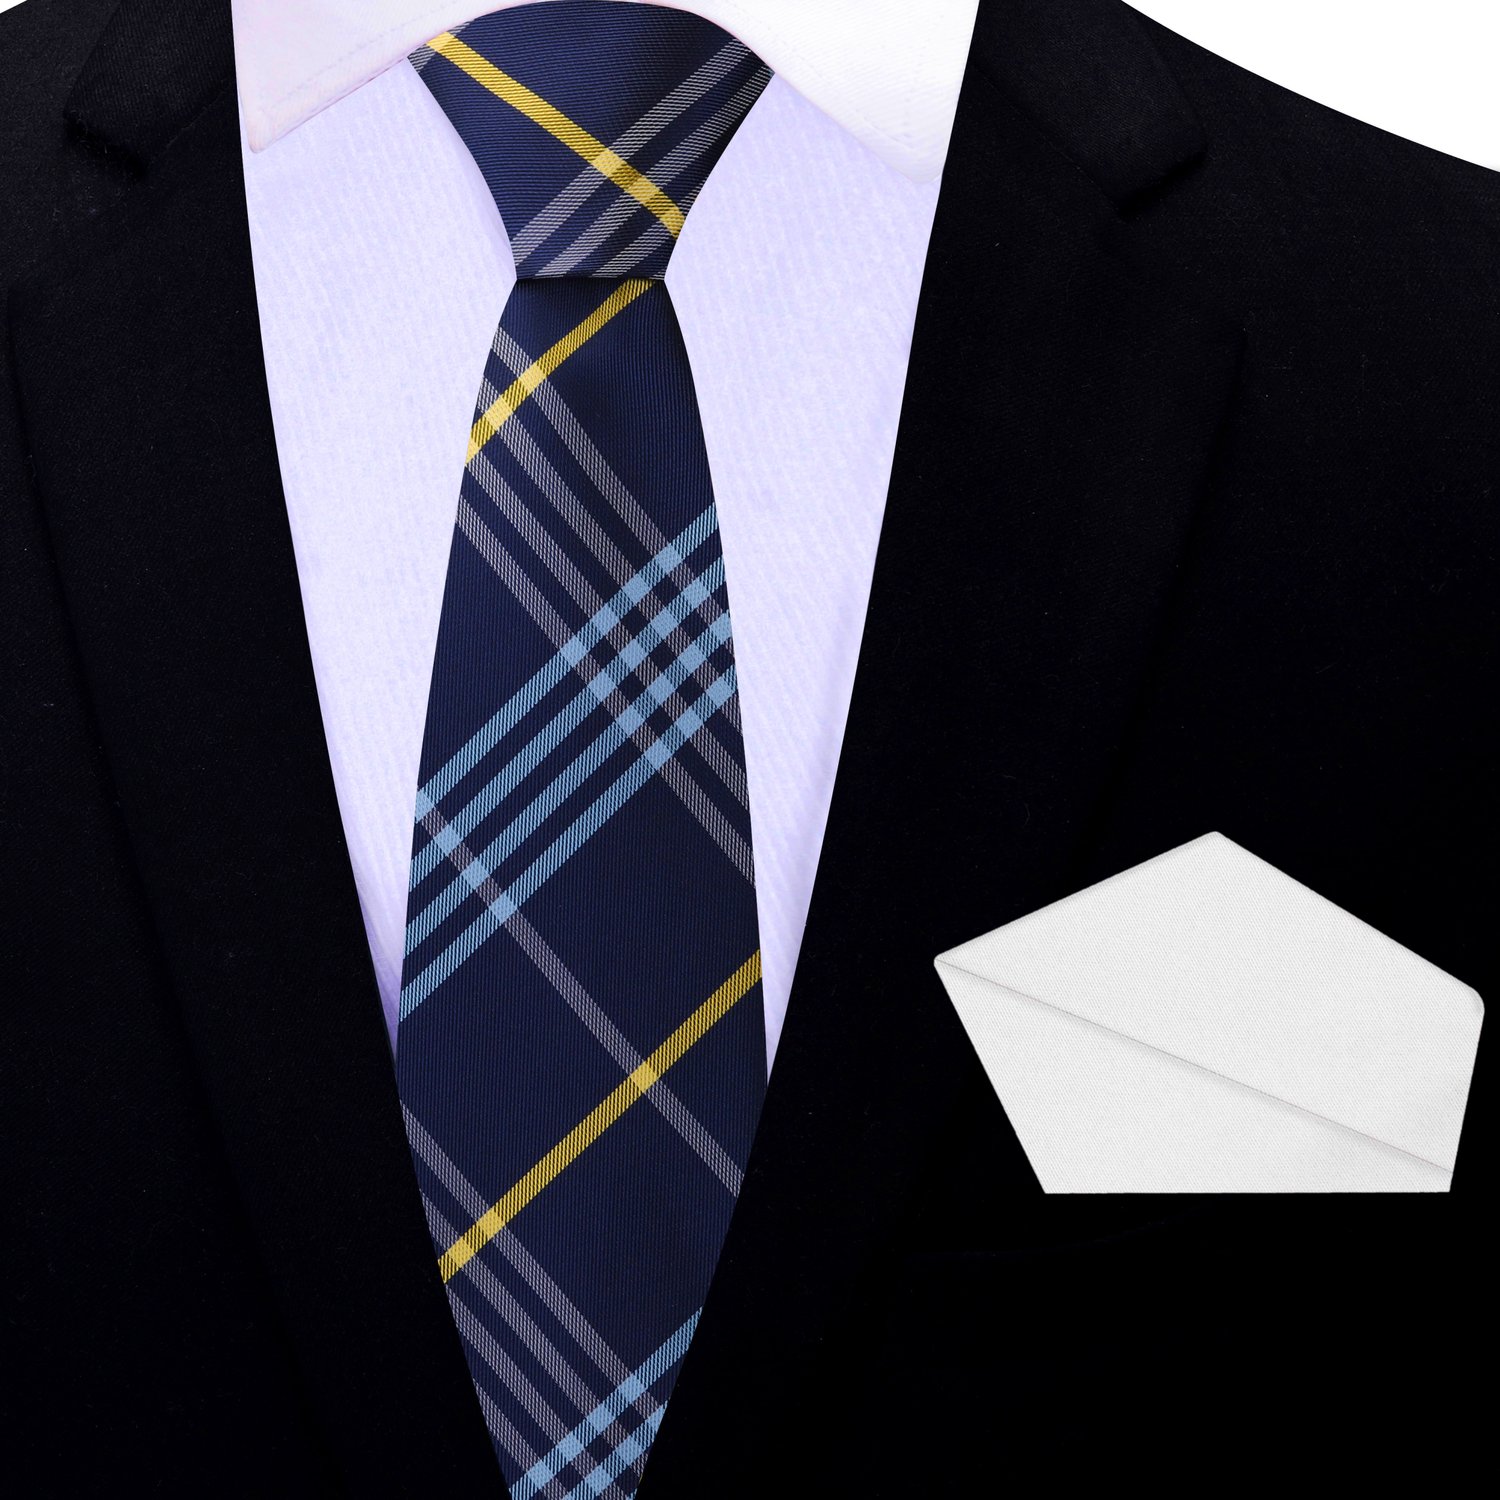 Thin Tie: Blue and Yellow Plaid Necktie with White Square